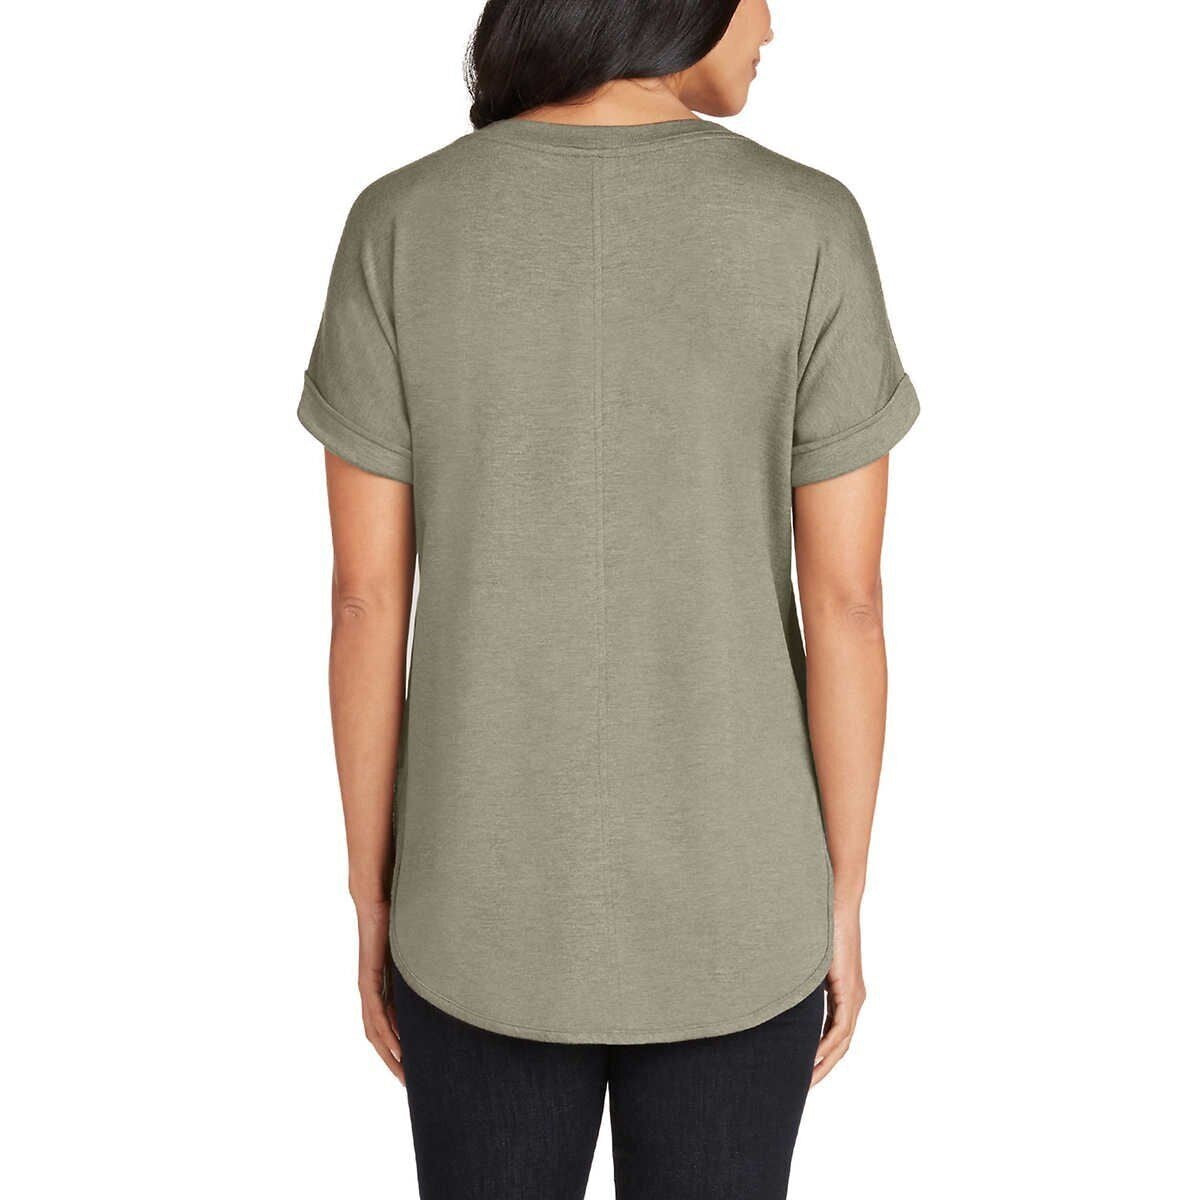 Matty M Womens French Terry Tee Top